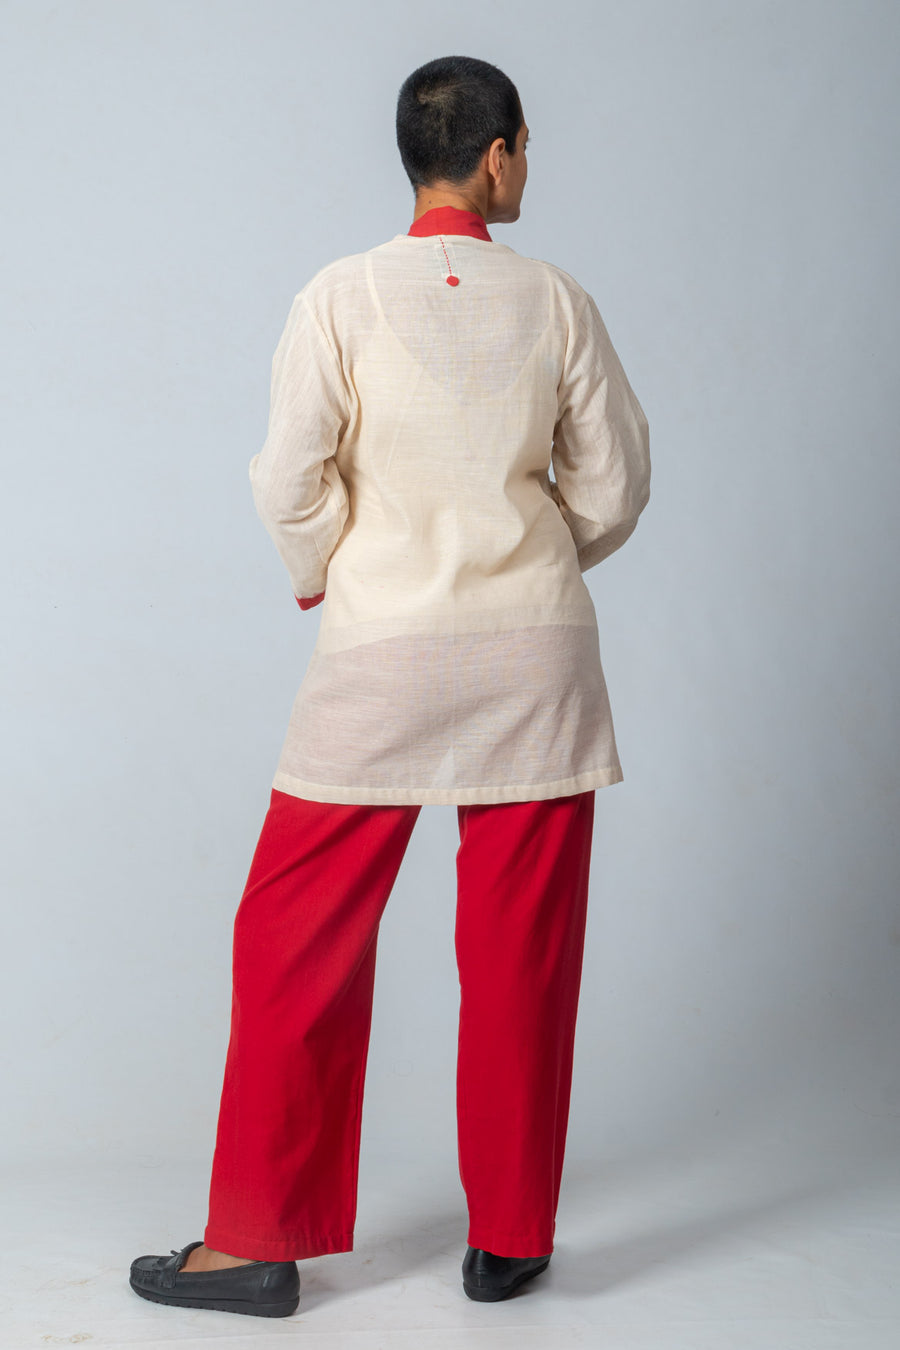 Off White Organic Cotton Top, Red Trousers and temple border jacket - JOWAKI SET